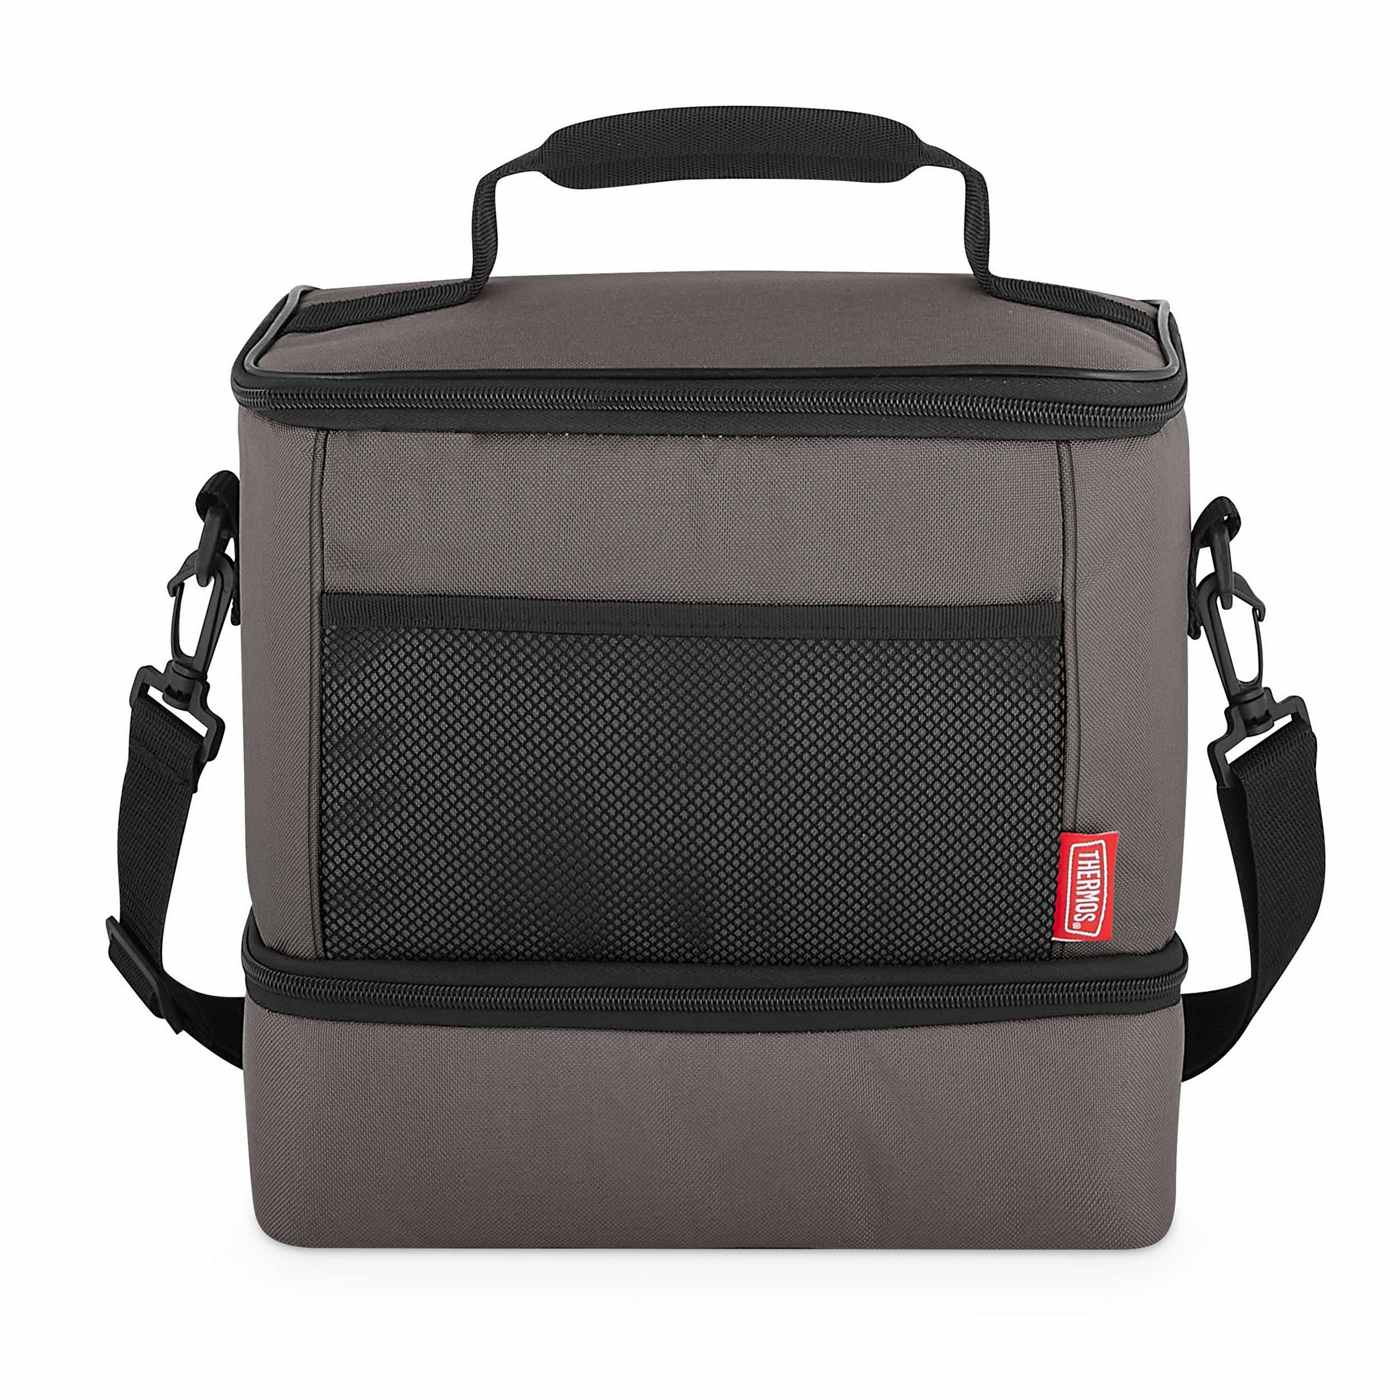 Thermos Lunch Lugger - Gray; image 1 of 3